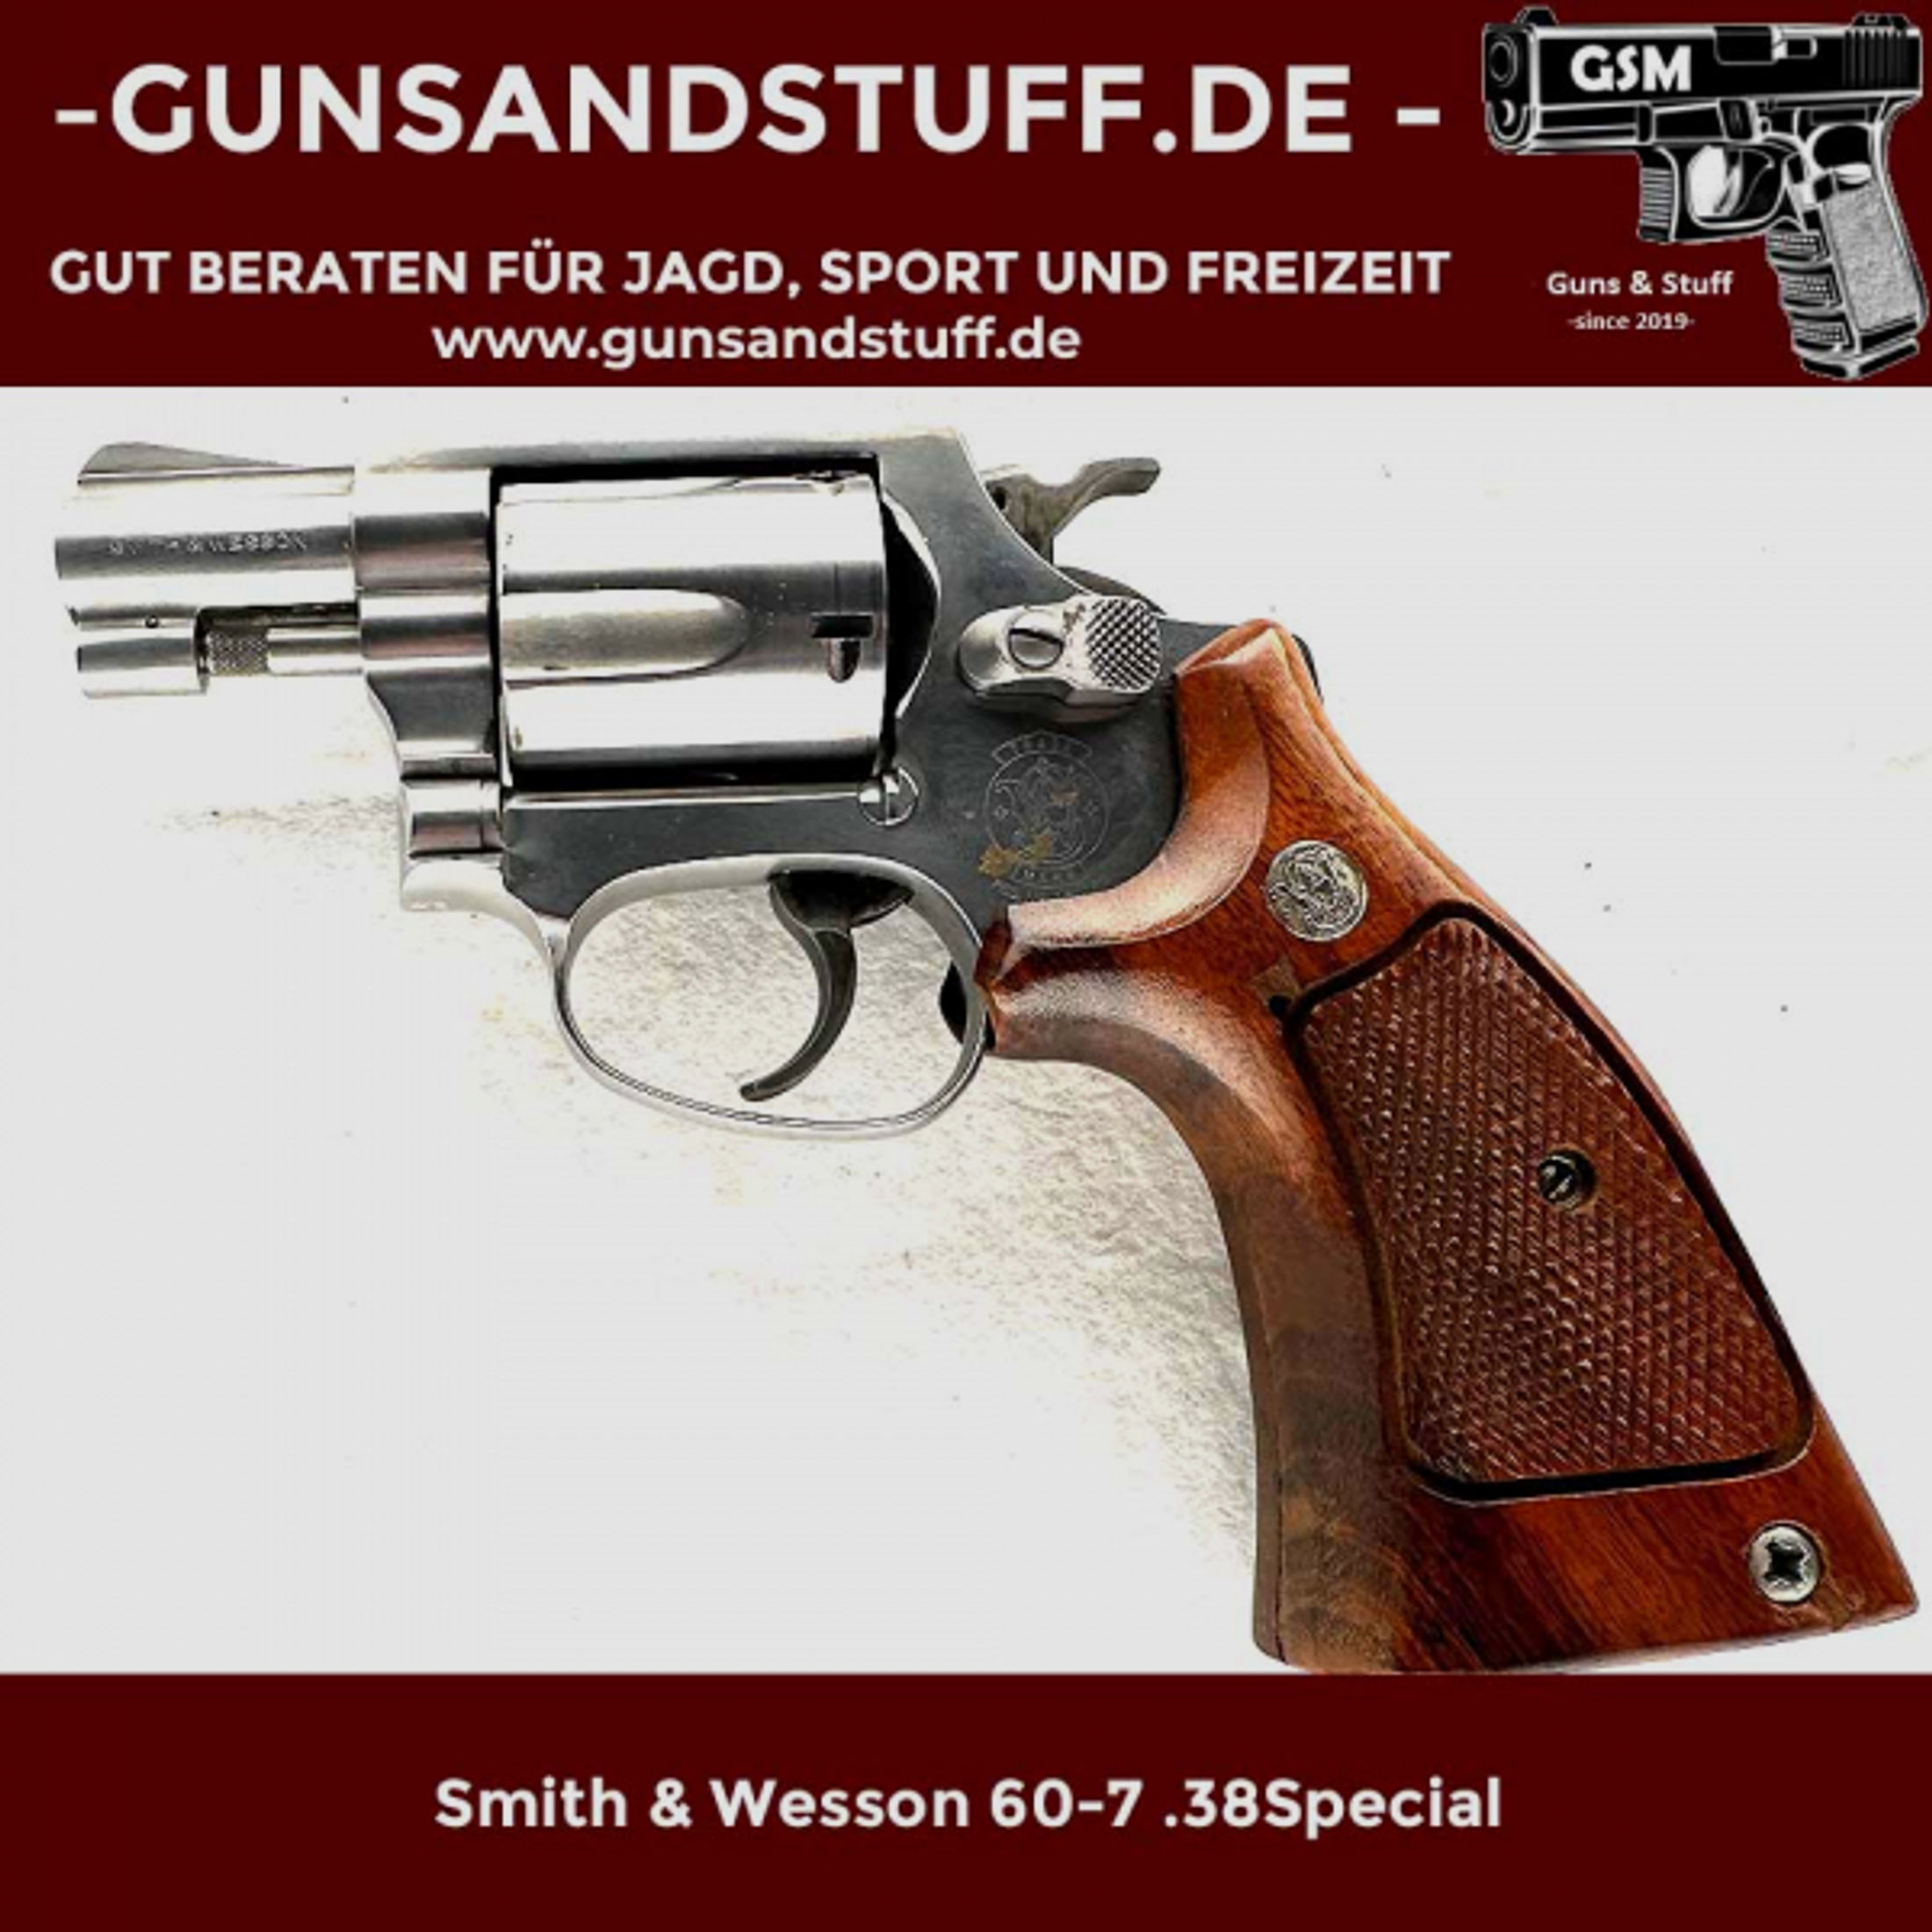 Smith & Wesson 60-7 .38Special